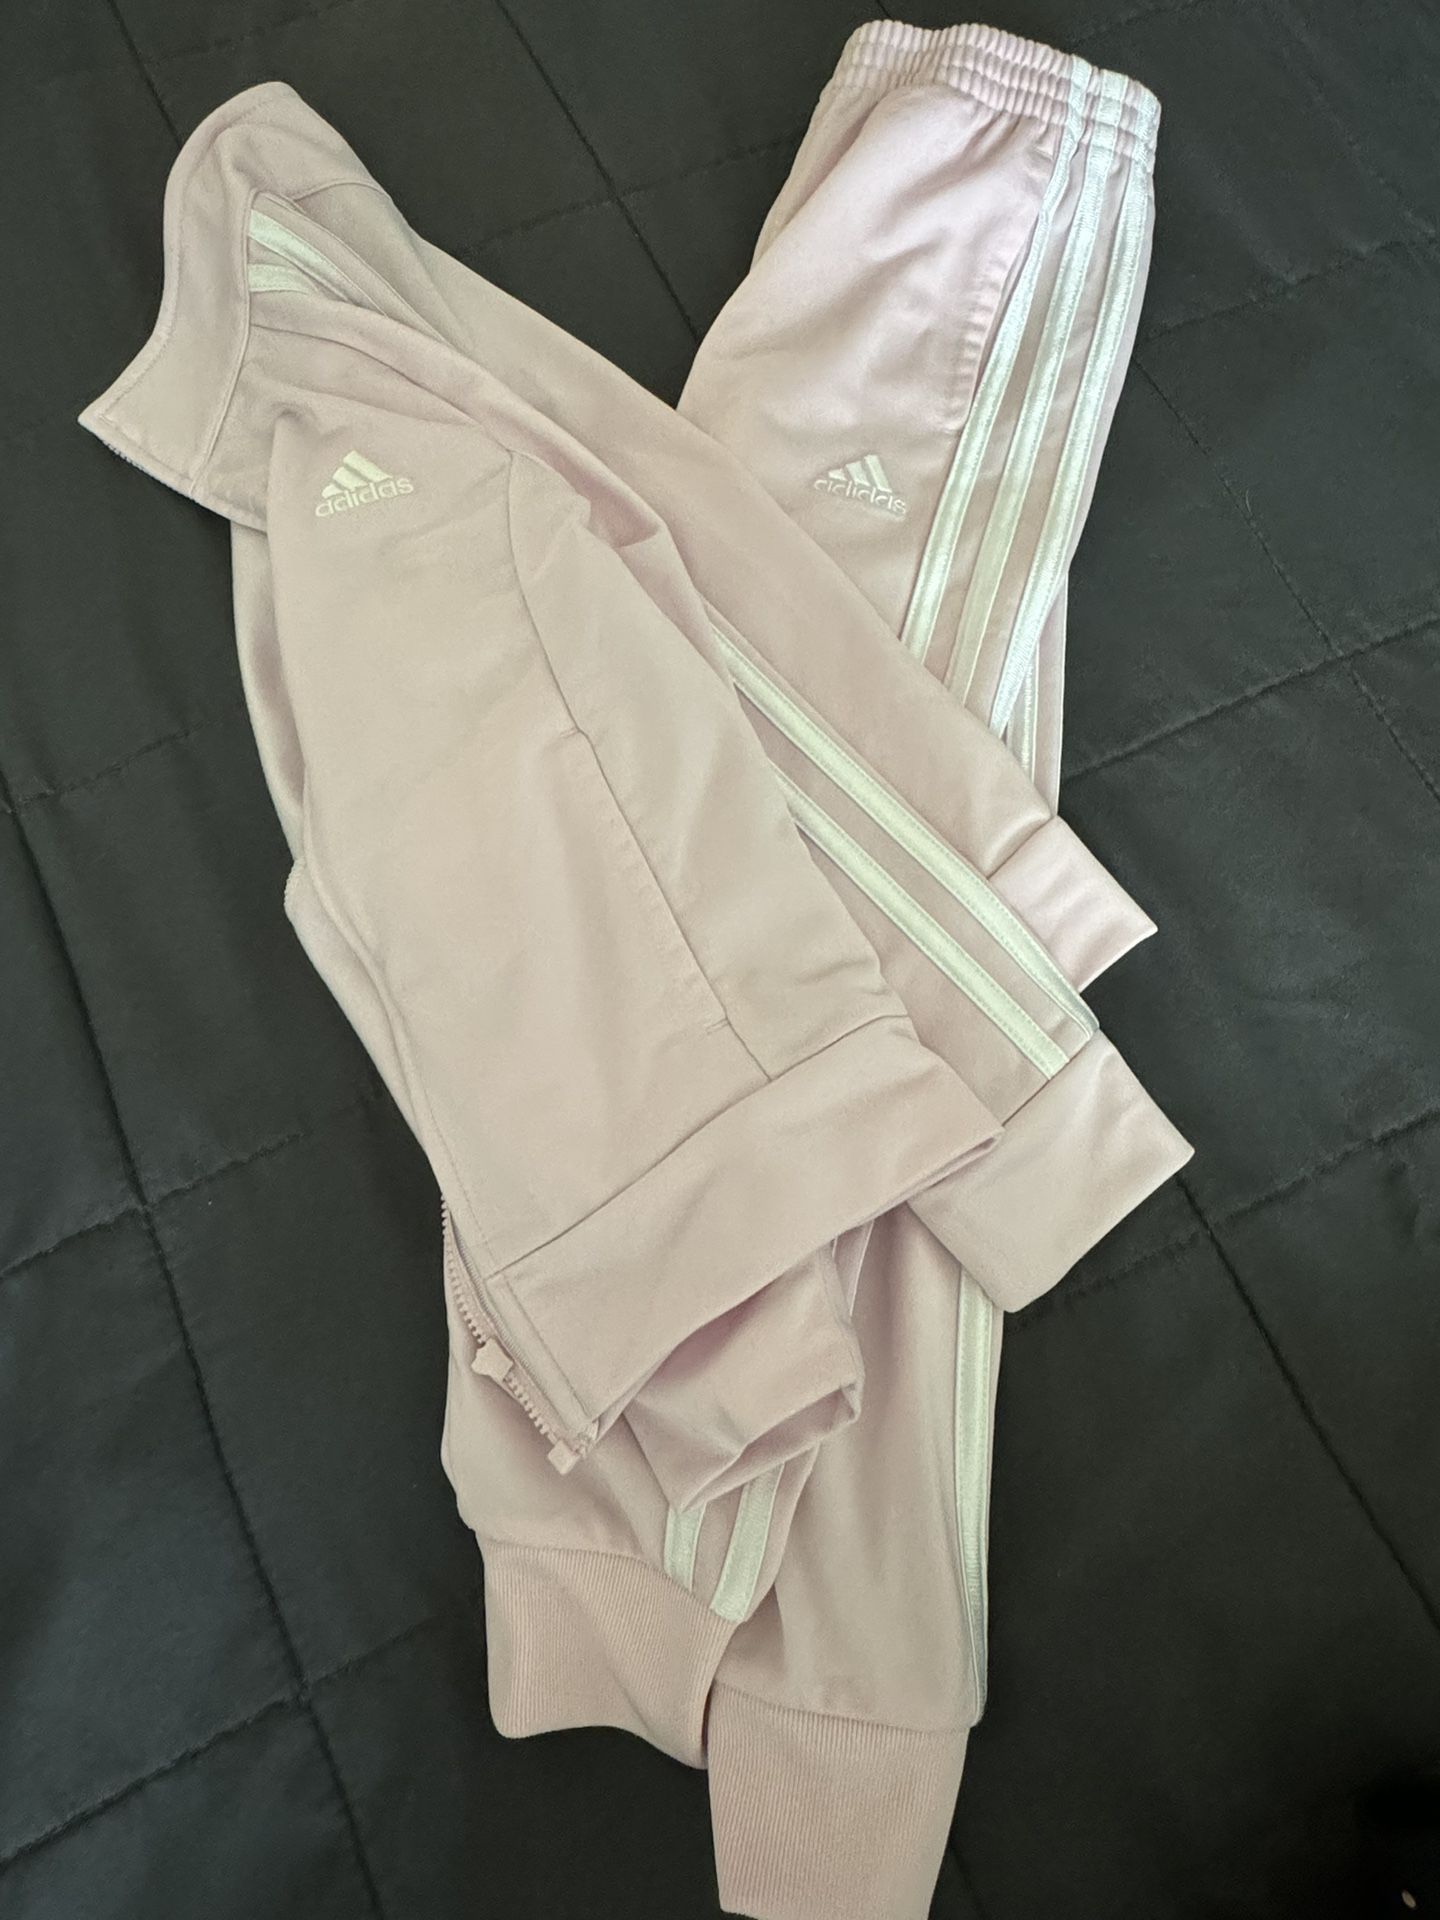 Girls Adidas Outfit 